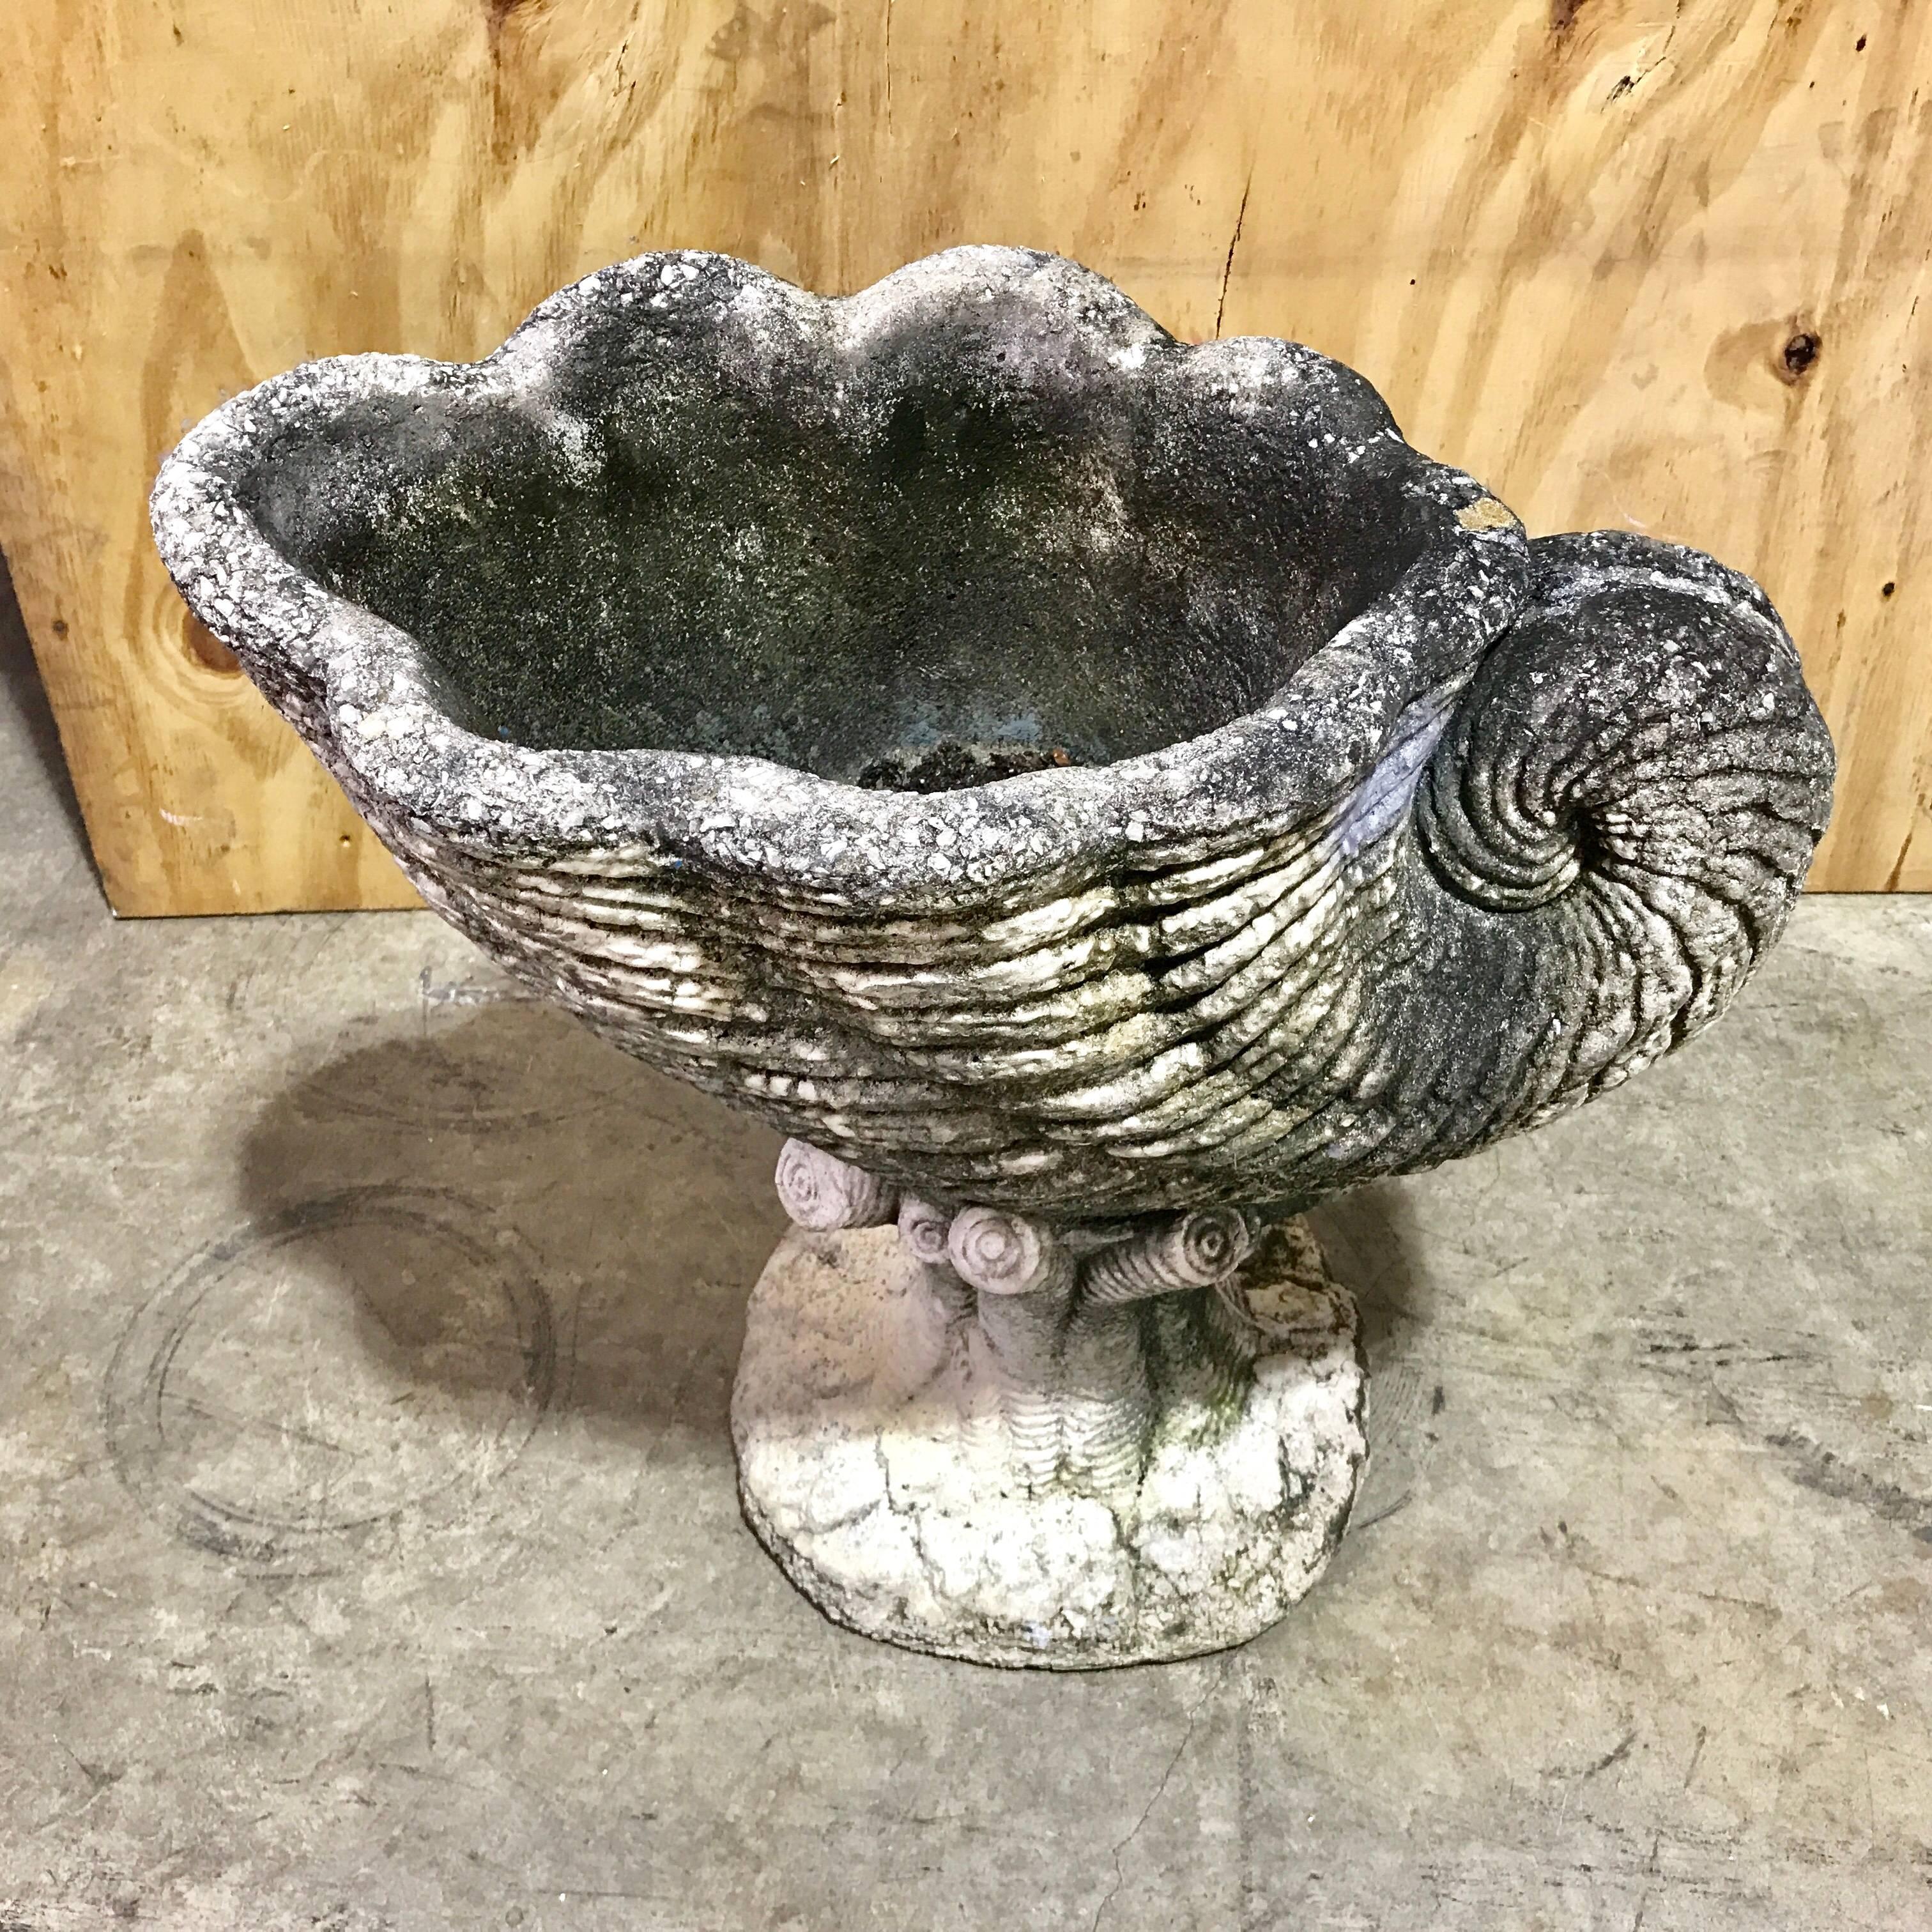 Vintage cast stone nautilus shell planter, raised on coral motif base.
Measures: The interior of the shell planter is 15